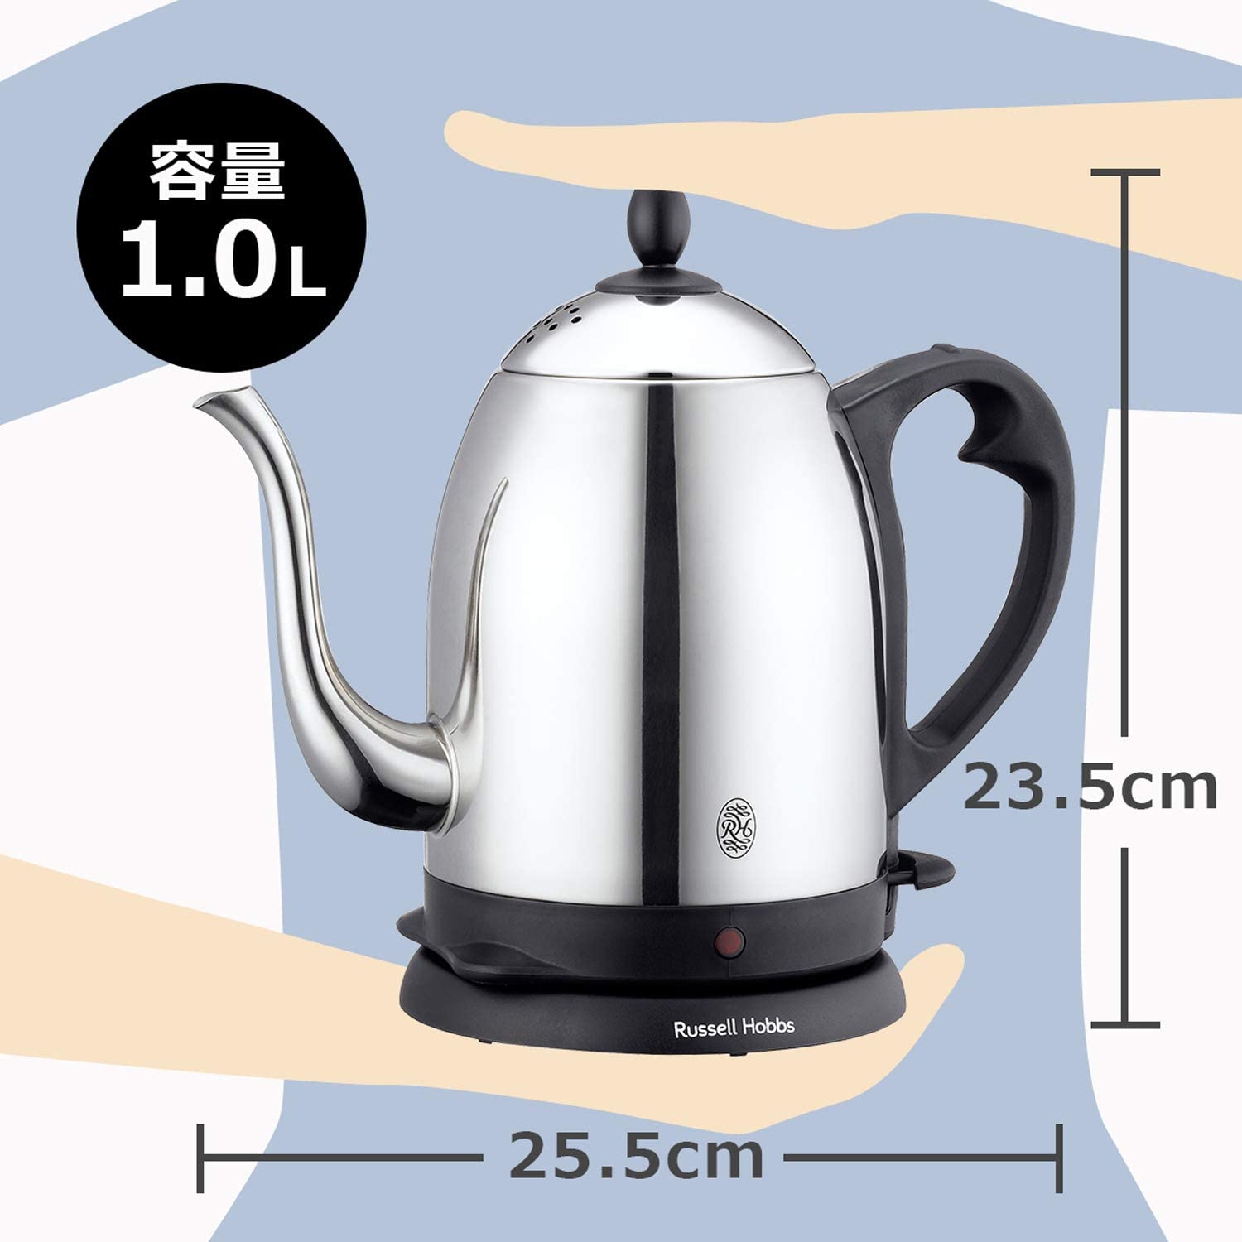 Russell Hobbs(ラッセルホブス) Cafe Kettle 7410JPの商品画像サムネ4 